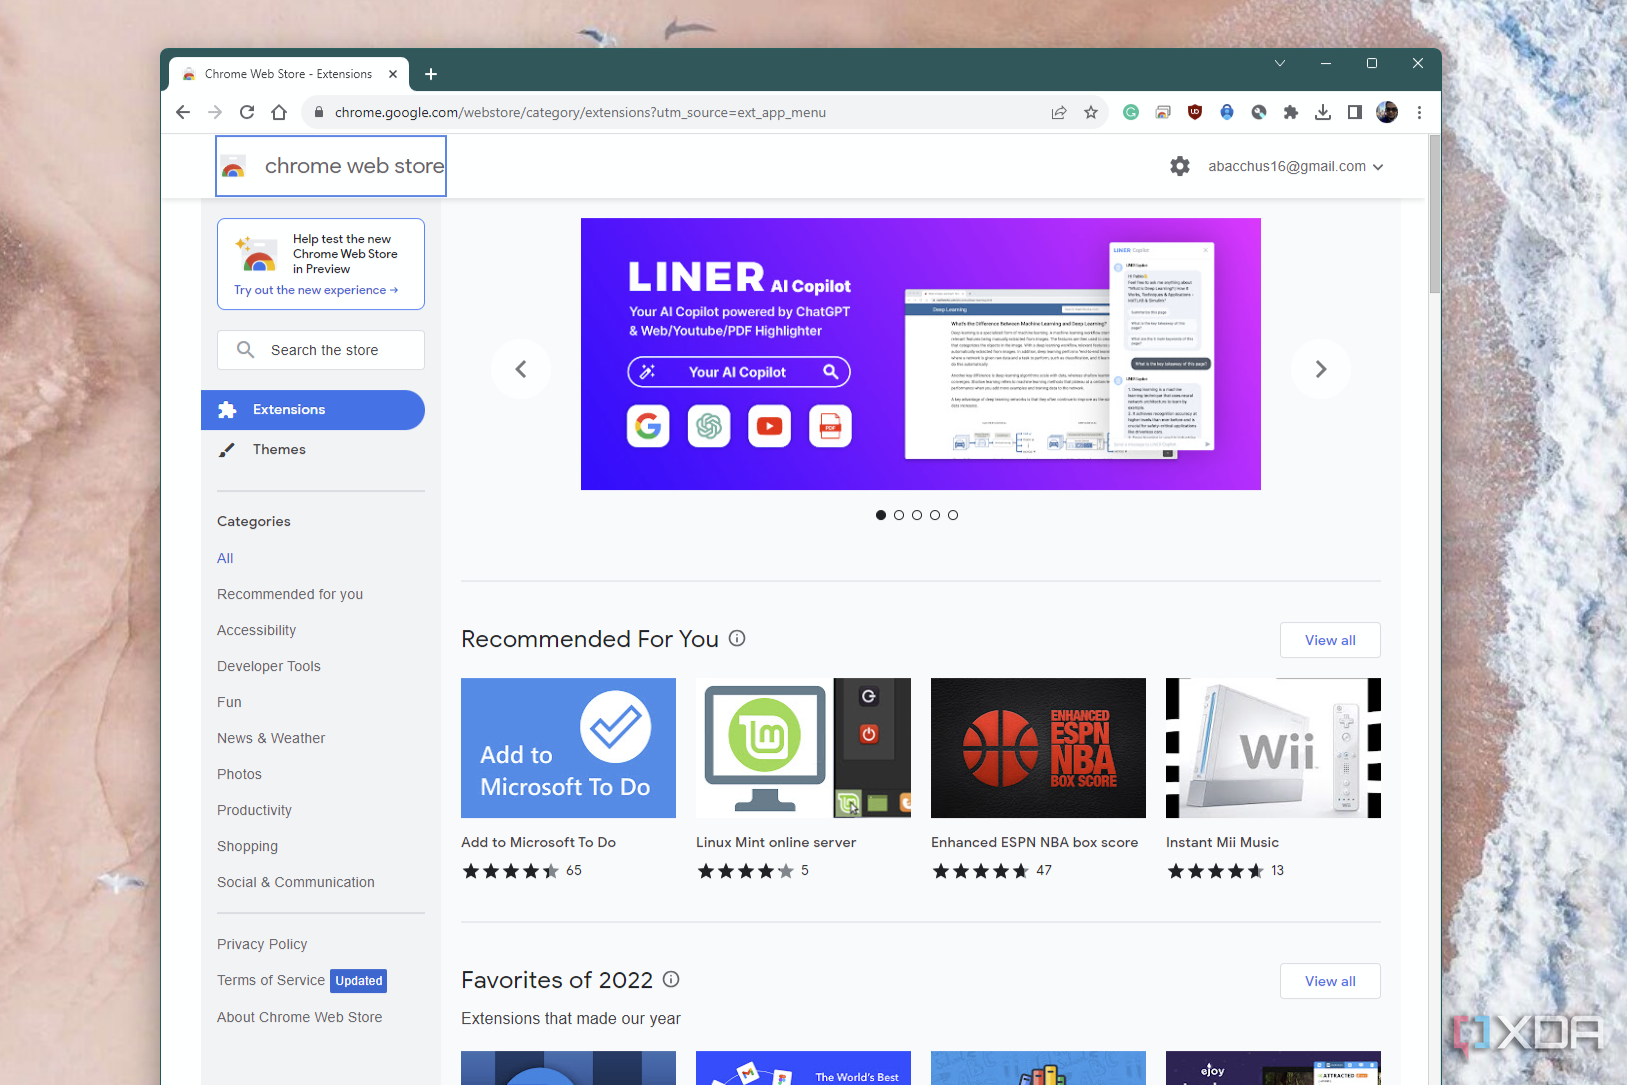 How to open the Chrome Web Store